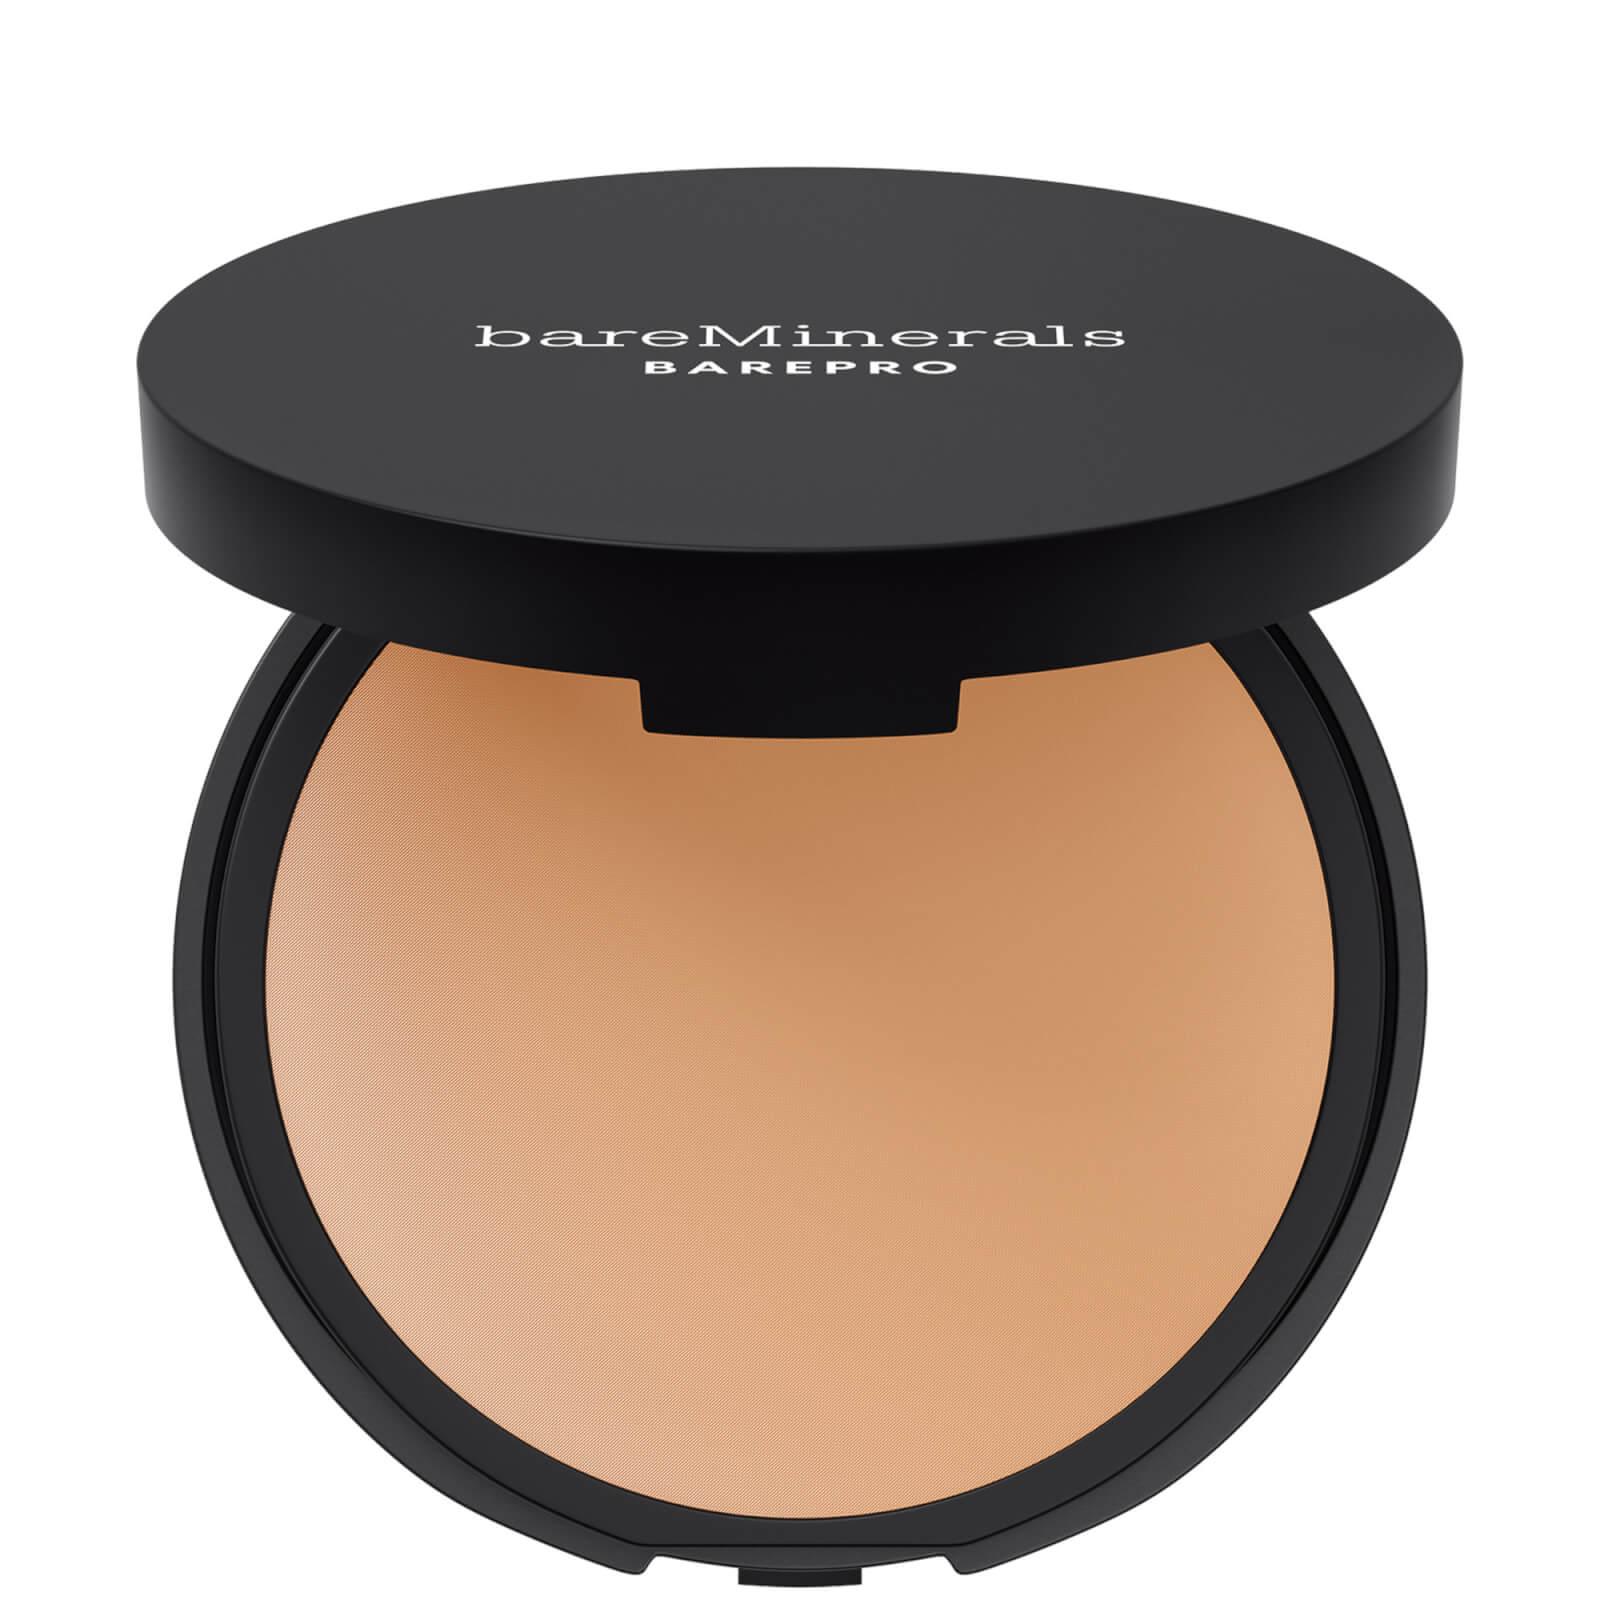 Image of bareMinerals BAREPRO Pressed 16 Hour Foundation 10g (Various Shades) - Light 27 Neutral